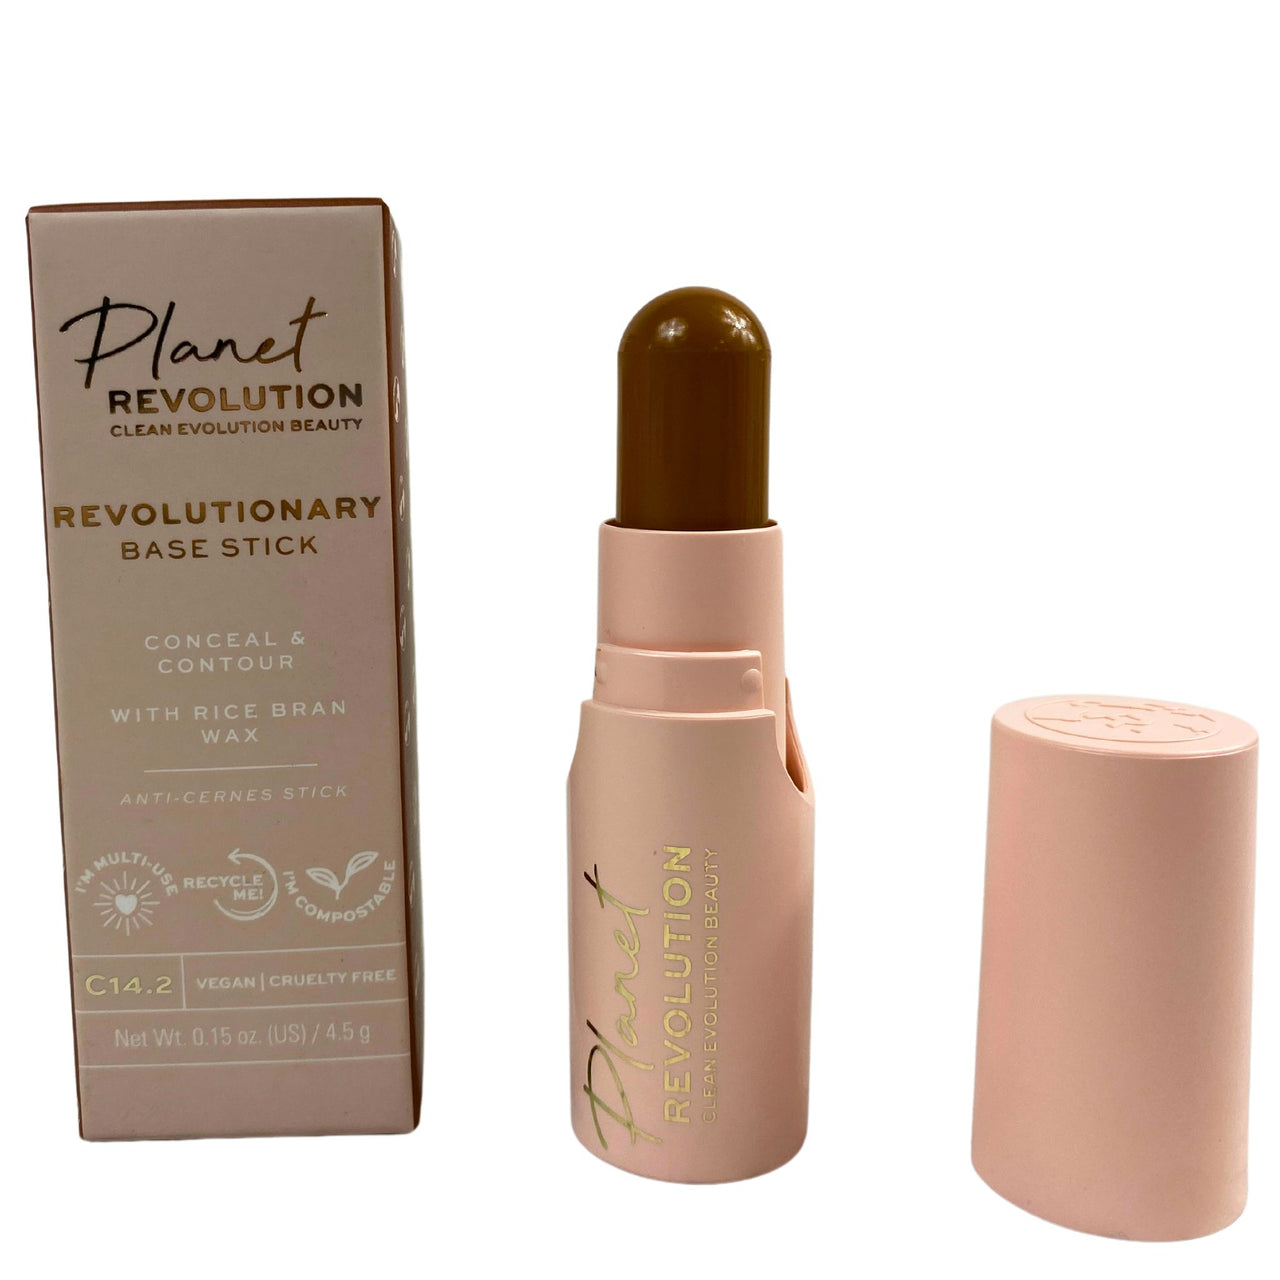 Planet Revolution Revolutionary Base Stick Conceal & Contour with Rice Bran Wax